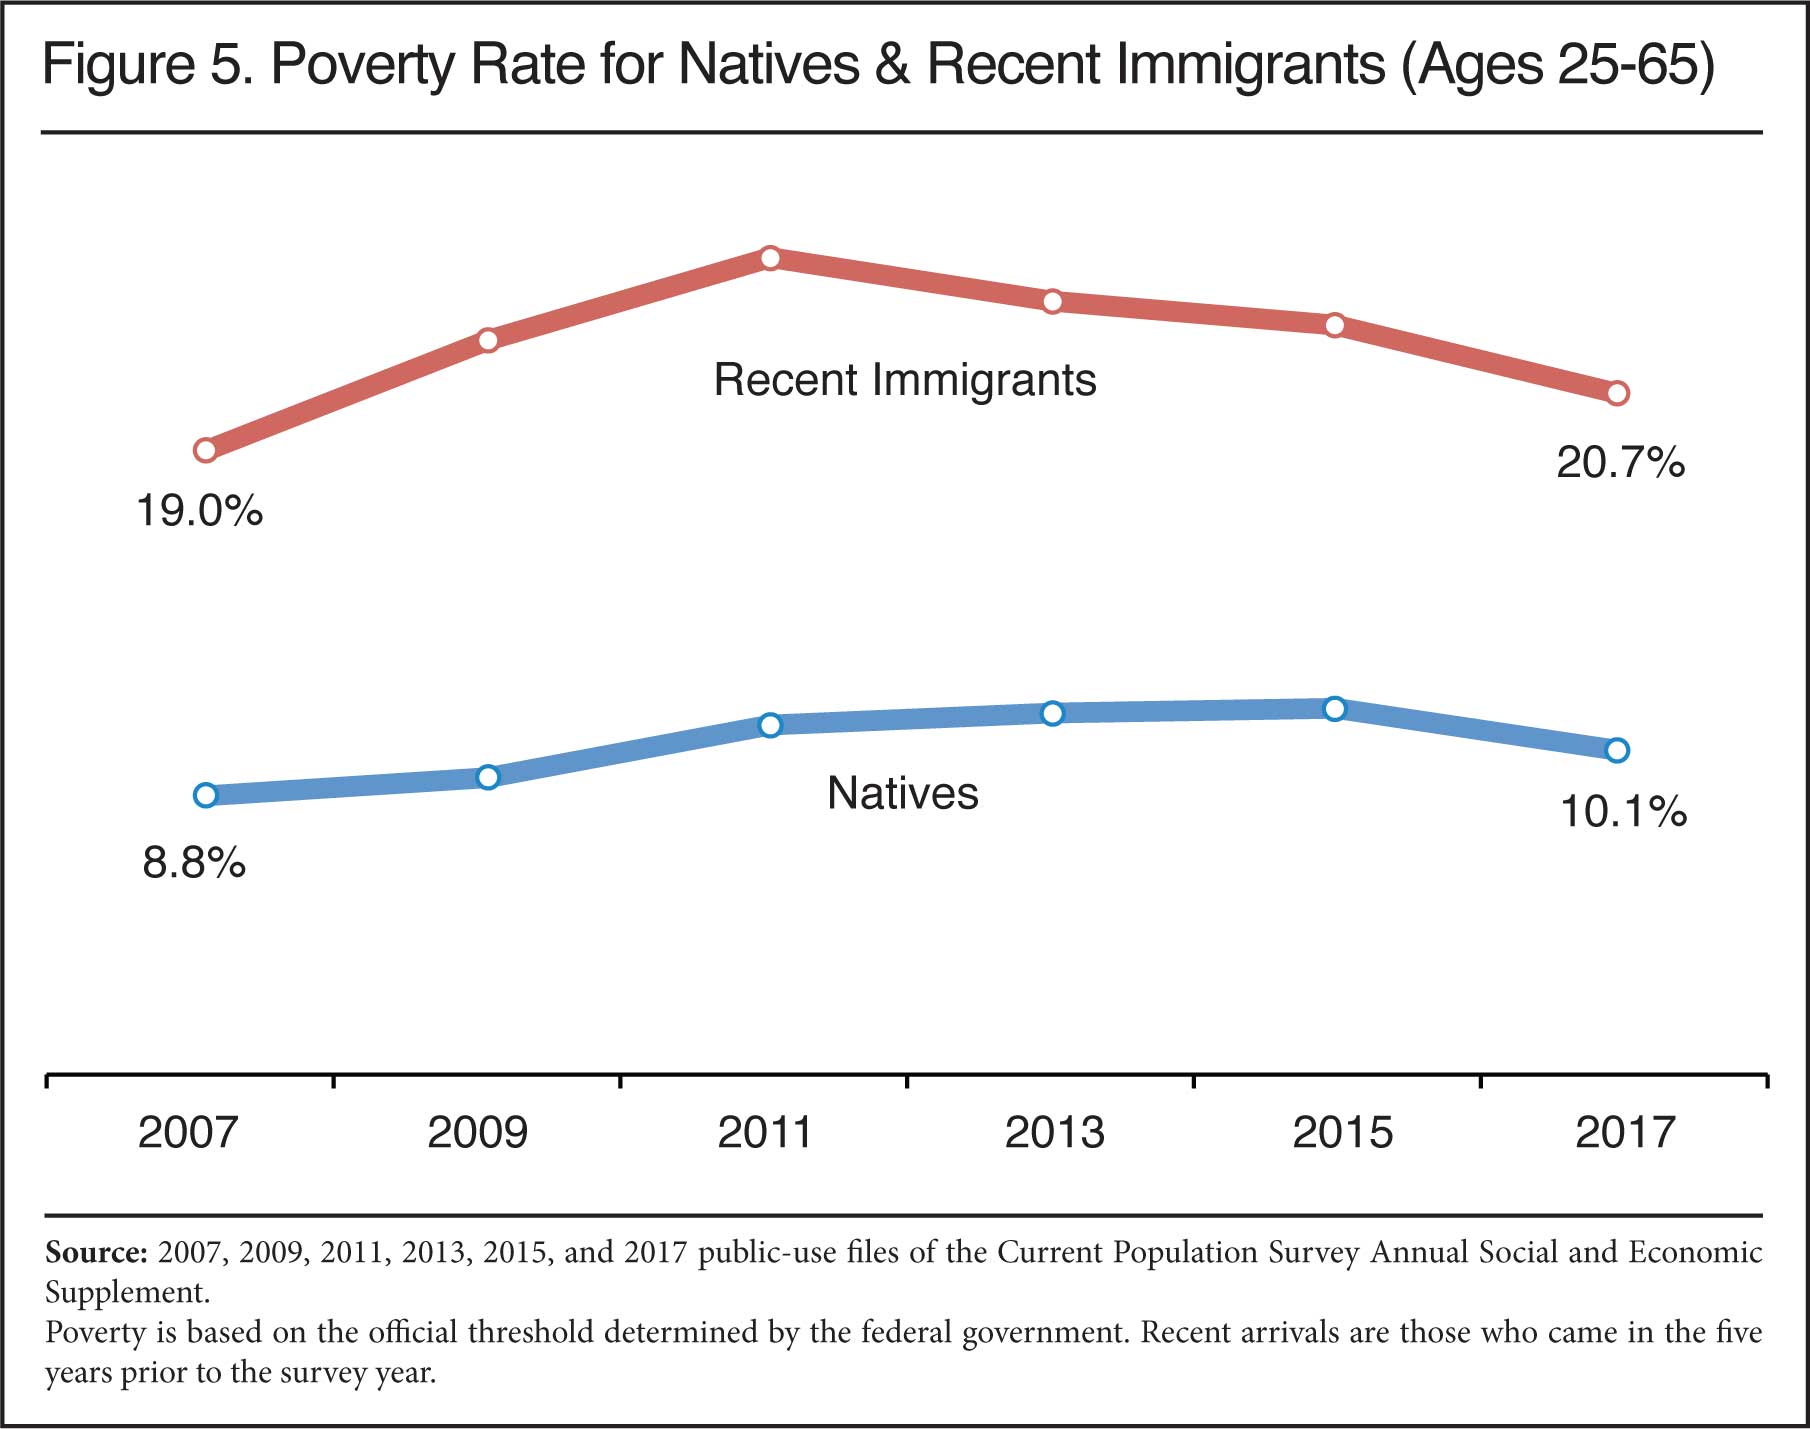 Graph: Poverty Rate for Natives and Recent Immigrants, 2007 to 2017